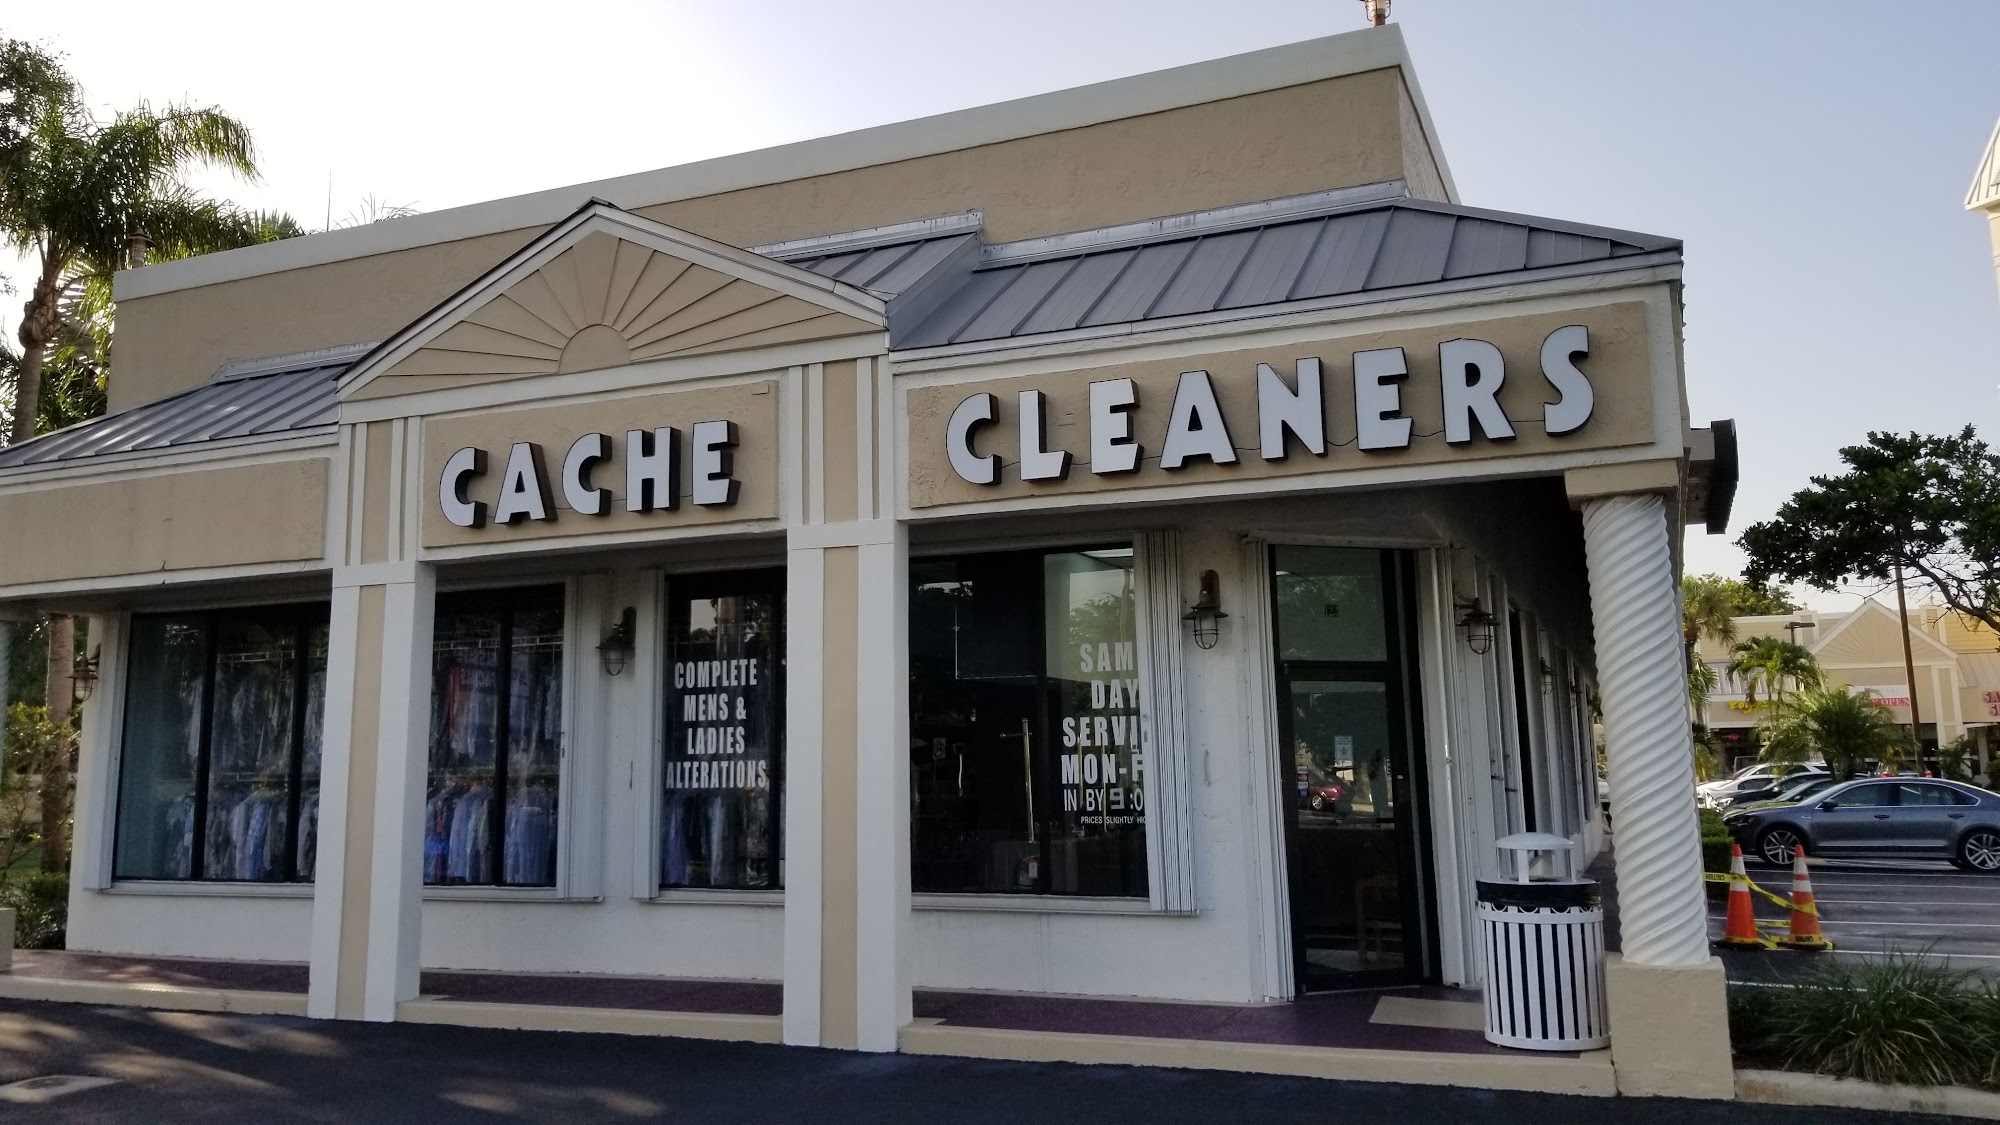 Cache Cleaners